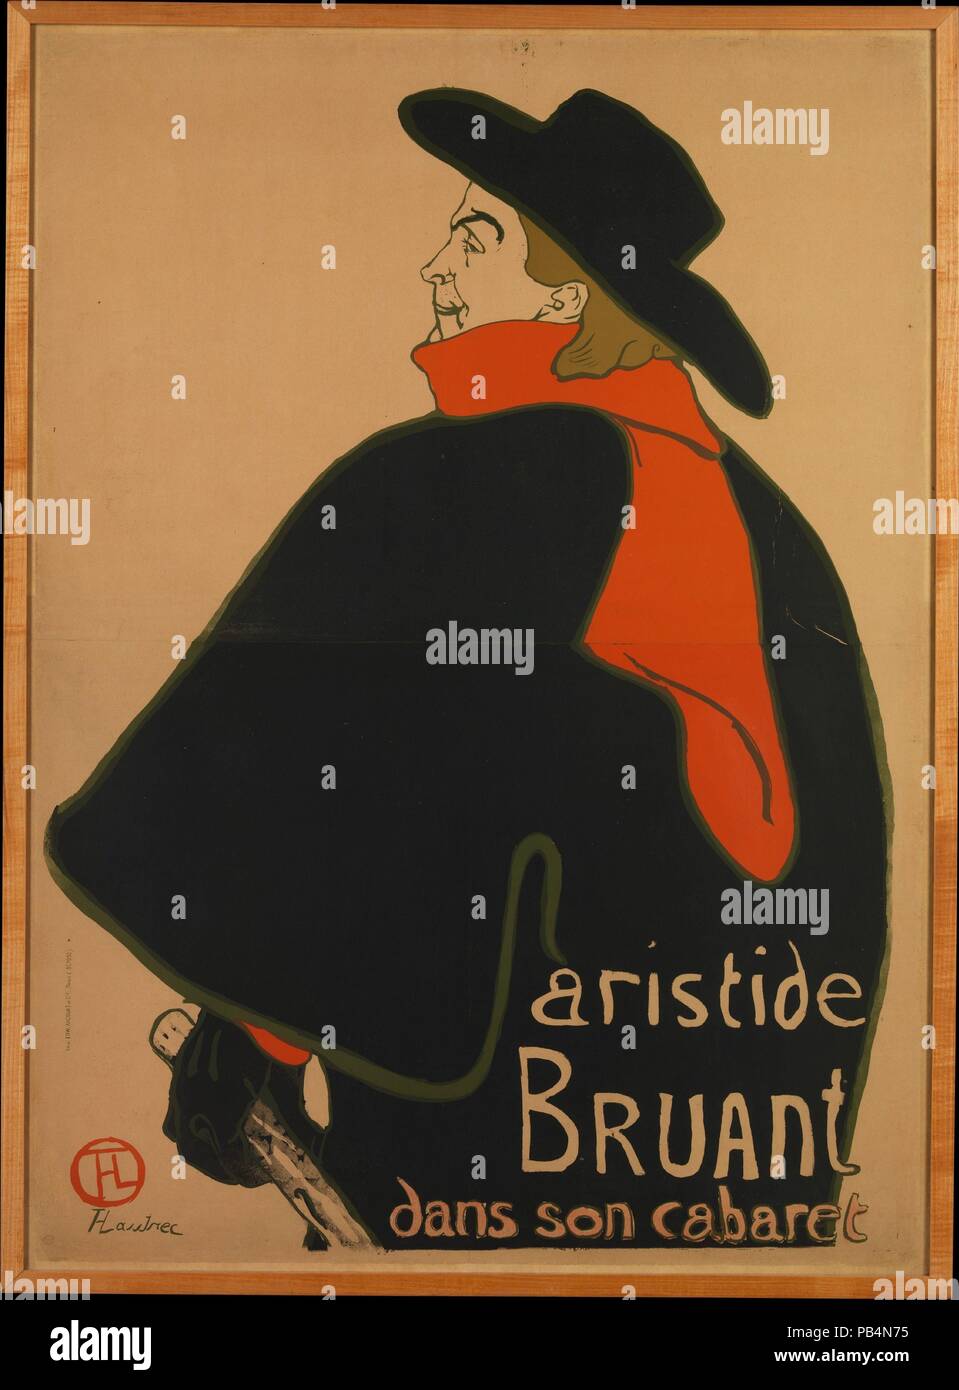 Aristide Bruant, at His Cabaret. Artist: Henri de Toulouse-Lautrec (French, Albi 1864-1901 Saint-André-du-Bois). Dimensions: Sheet: 54 5/16 x 39 in. (138 x 99 cm)  Frame: 56 3/4 × 41 3/4 in. (144.1 × 106 cm). Date: 1893.  Aristide Bruant was a successful singer, songwriter, and entrepreneur who ran a cabaret in the Montmartre quarter of Paris. When he began performing at up-scale café-concerts on the Champs-Élysées, he immediately commissioned Toulouse-Lautrec to market his rough street persona in a manner that would appeal to a bourgeois audience. Seizing on Bruant's trademark costume of a wi Stock Photo